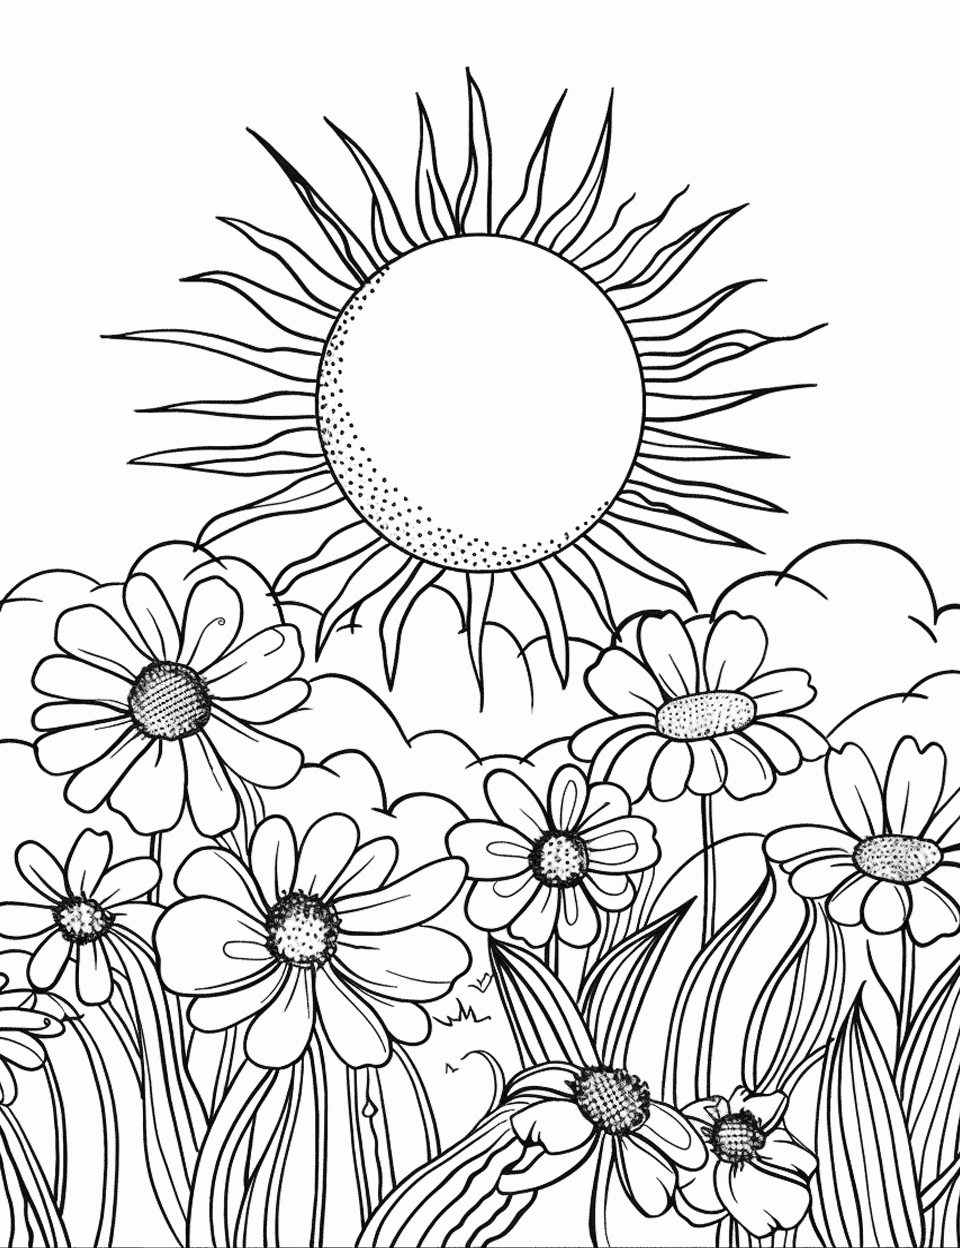 Sun Over a Blooming Meadow Coloring Page - A warm sun shining over a meadow full of wildflowers.